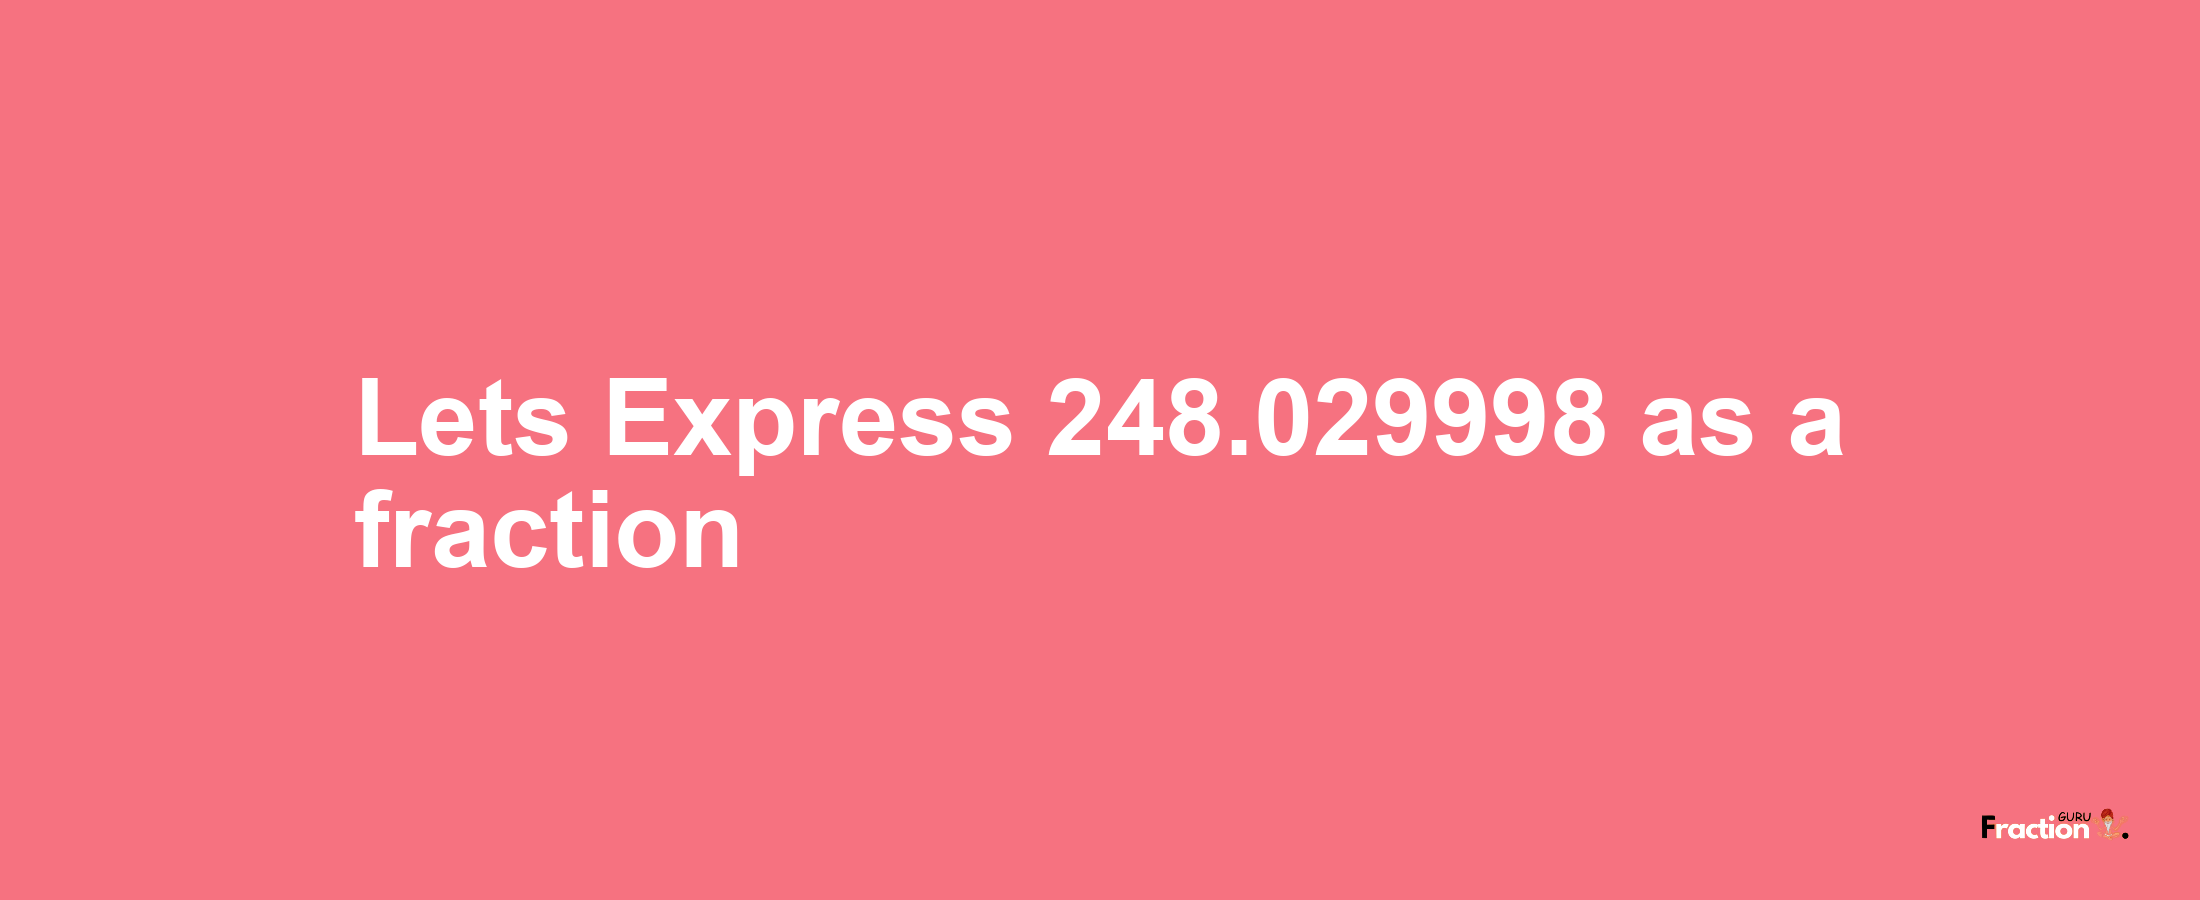 Lets Express 248.029998 as afraction